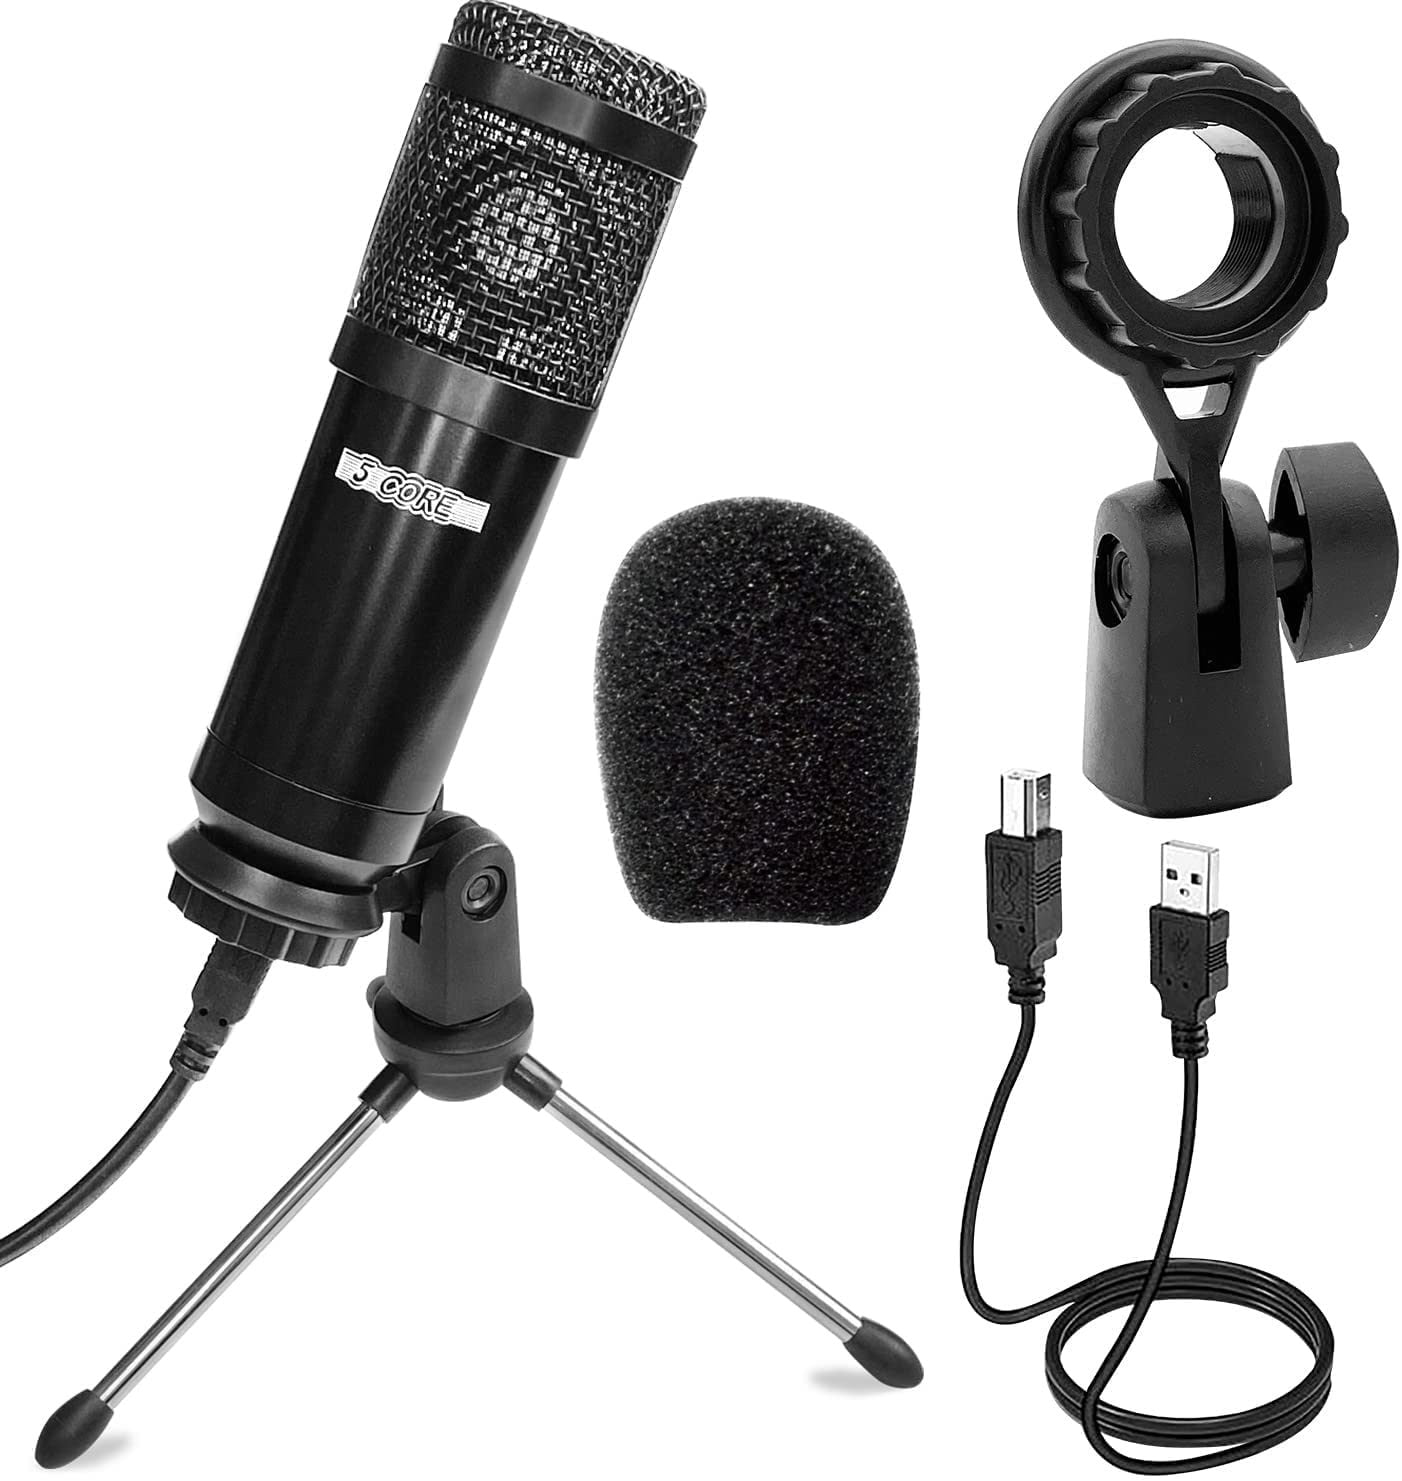 USB Microphone Condenser Mic for Computer PC Gaming Podcast Desktop Tripod Stand Kit for Streaming Recording Vocals Voice Cardioids Studio Microphone 5 Core RM 4 W / Tripod Stand Black - Walmart.com